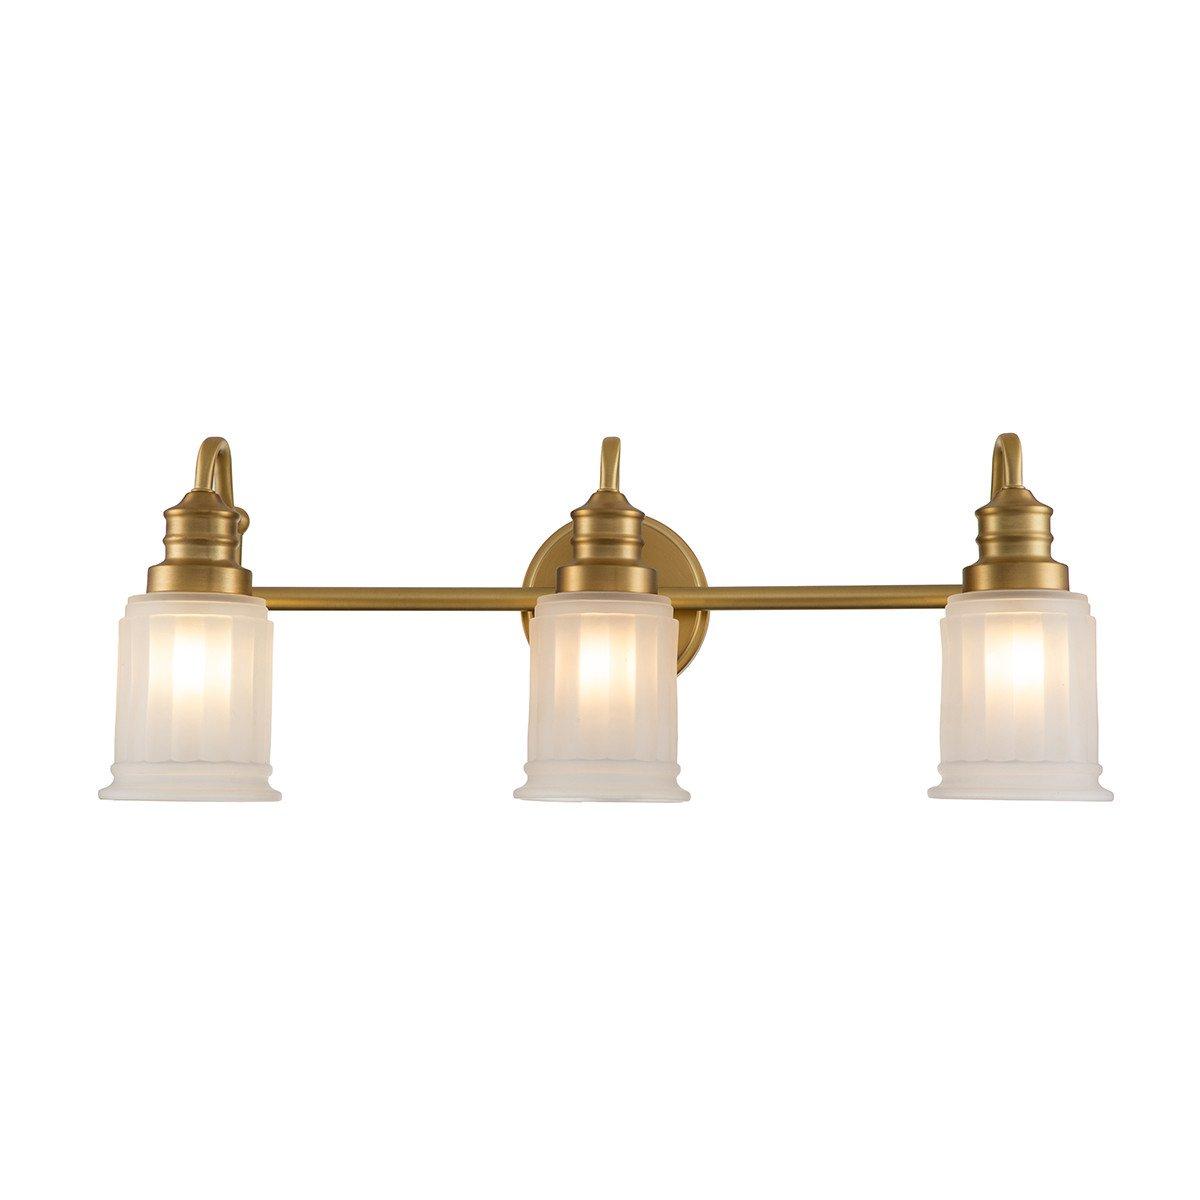 Quoizel Swell Wall Lamp Brushed Brass IP44